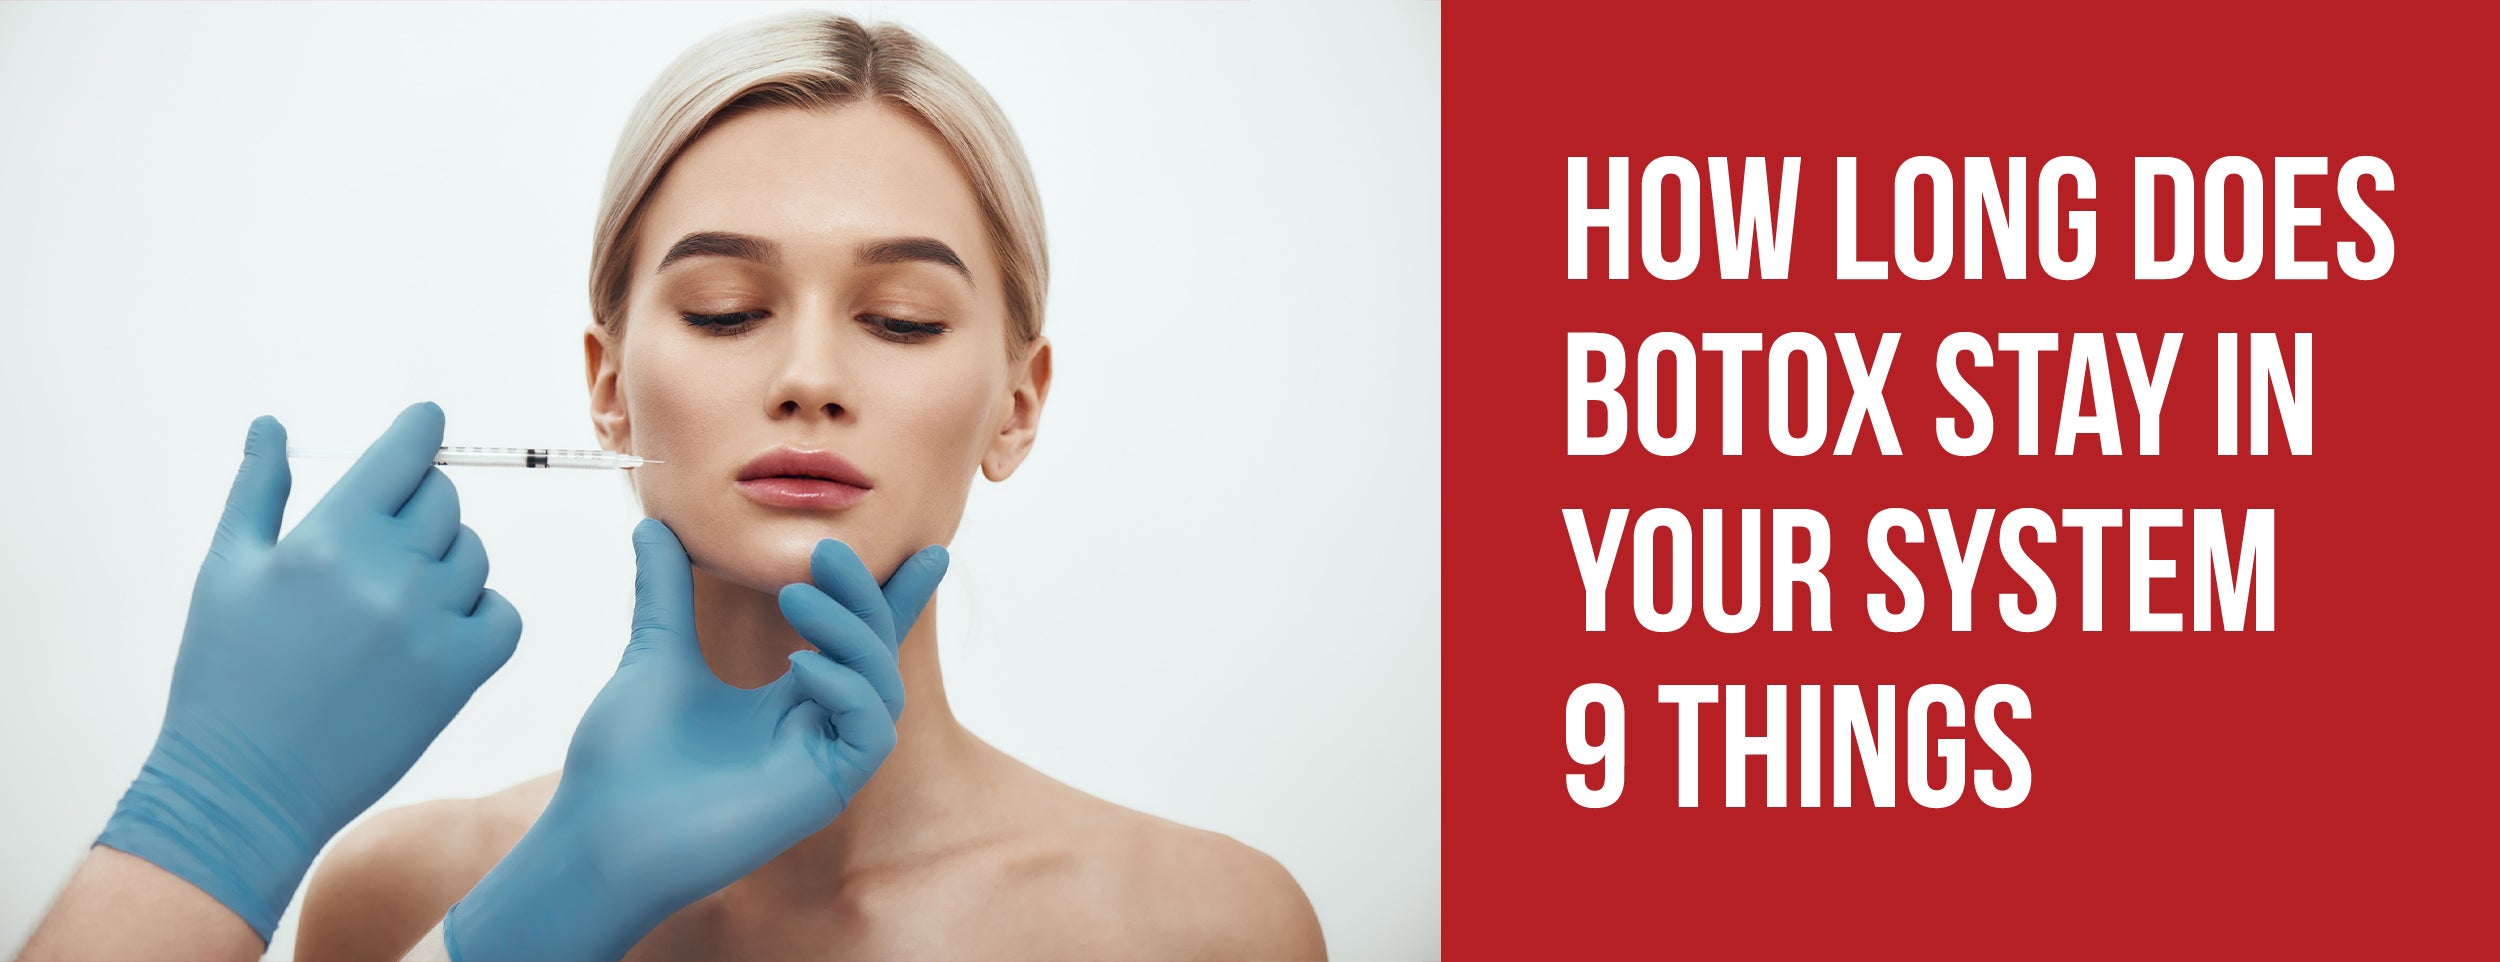 Depending on how much you use, your body will react to botox